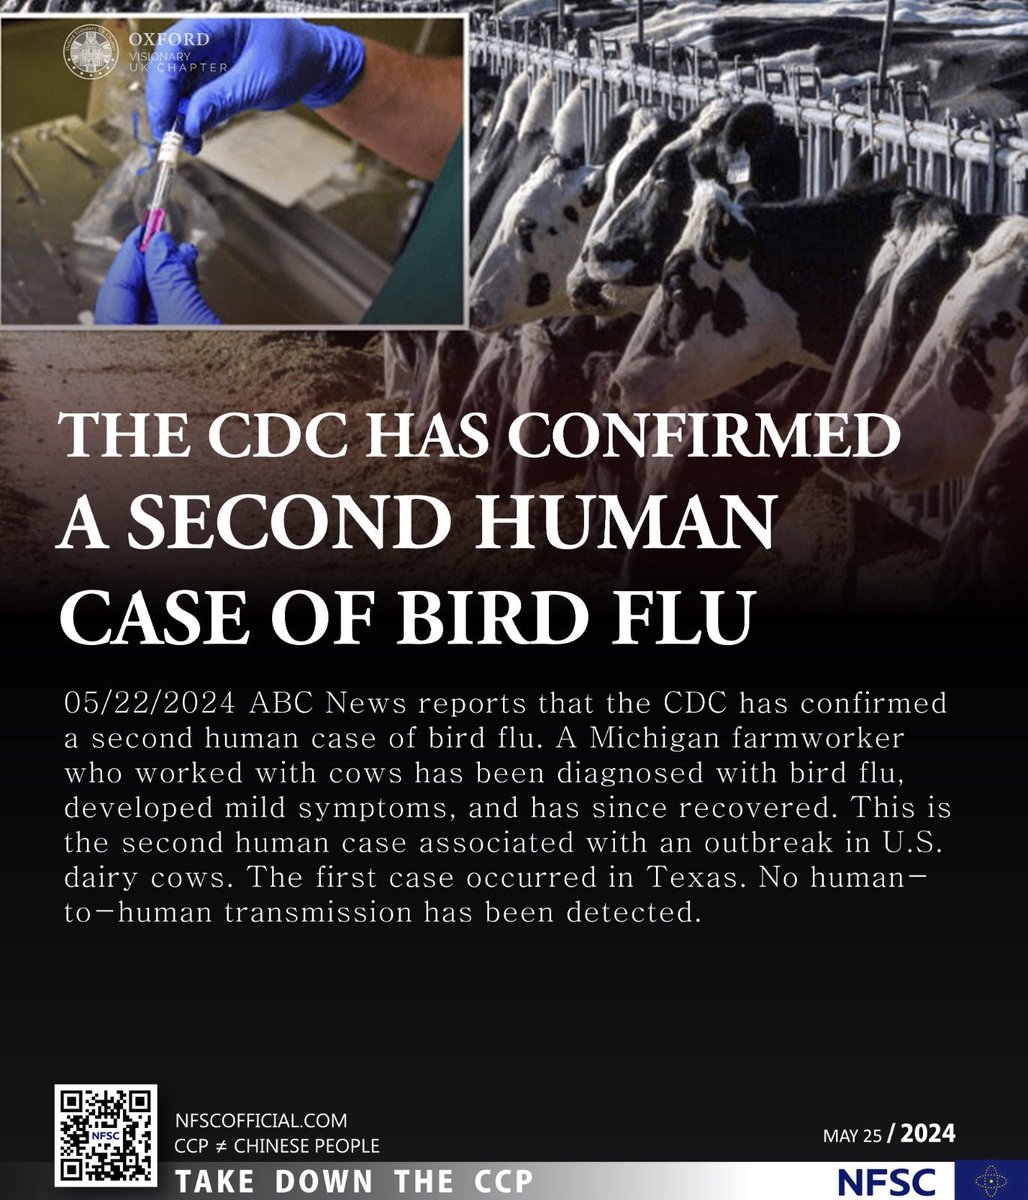 The CDC has confirmed a second human case of bird flu
05/22/2024 ABC News reports that the #CDC has confirmed a second human case of #bird #flu.A #Michigan farmworker who worked with cows has been diagnosed with bird flu,developed mild symptoms, and has since recovered. #decouple